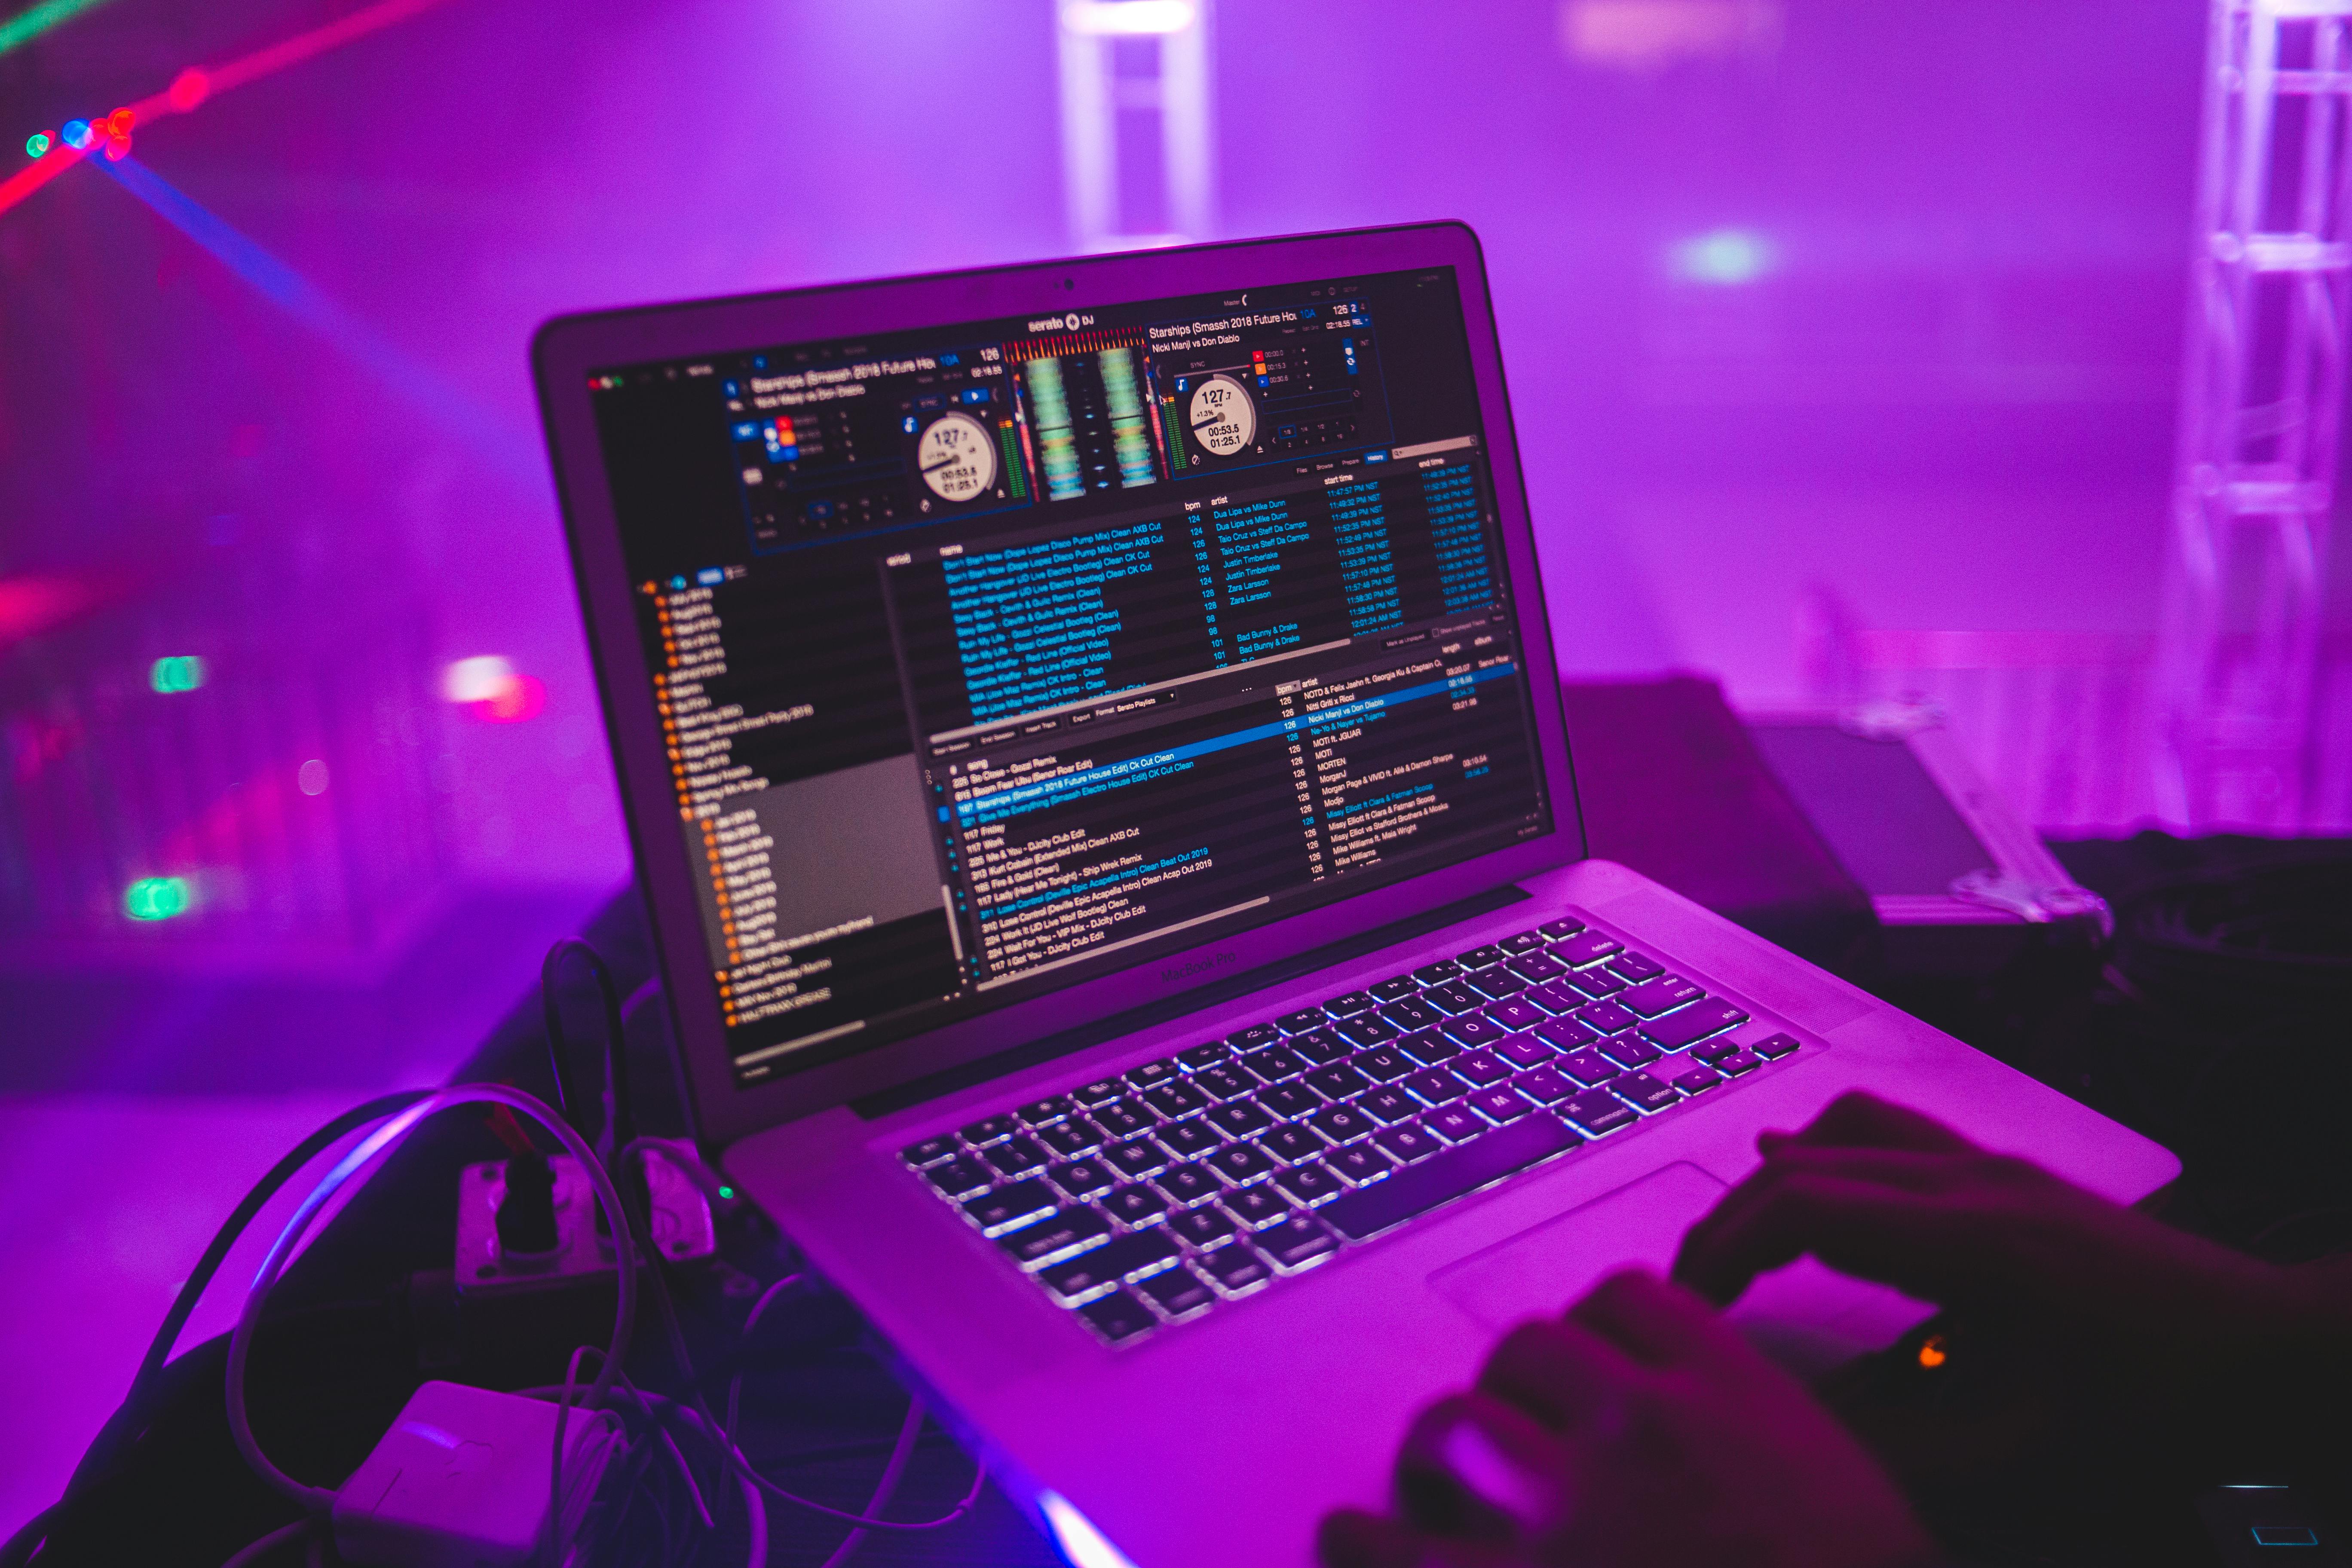 crop dj with laptop in club